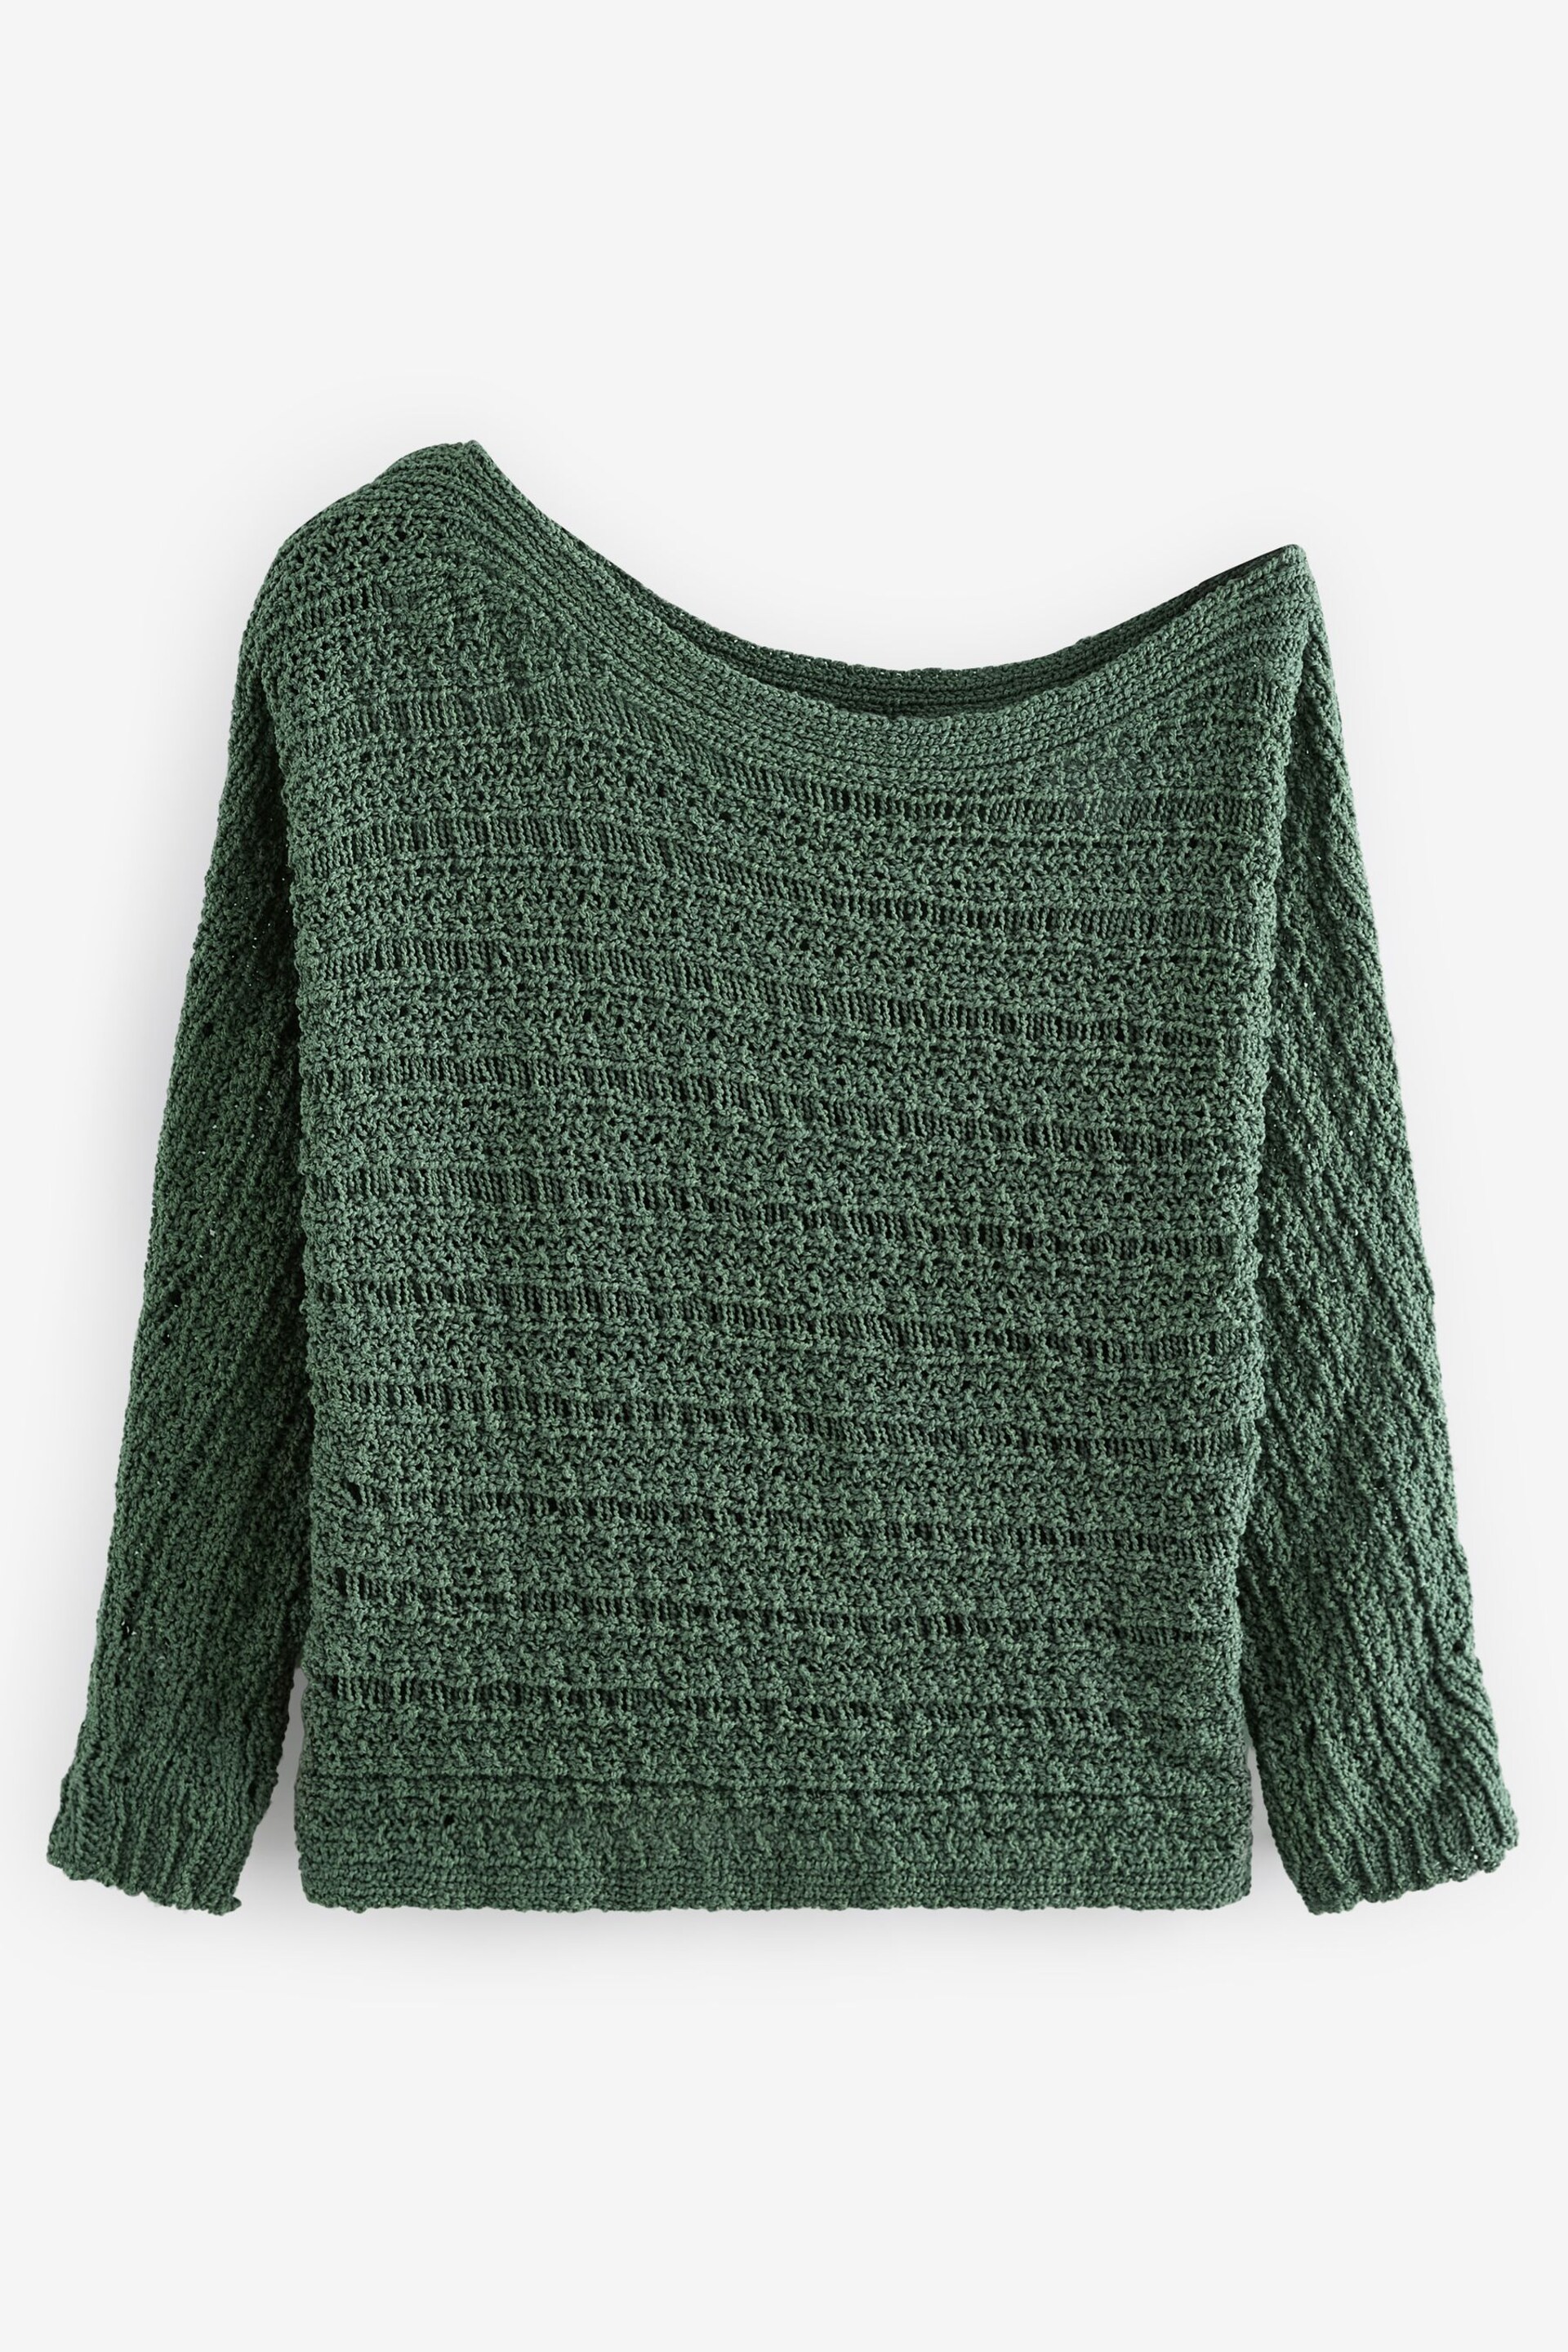 Green Knitted Long Sleeve Off The Shoulder Top - Image 5 of 6